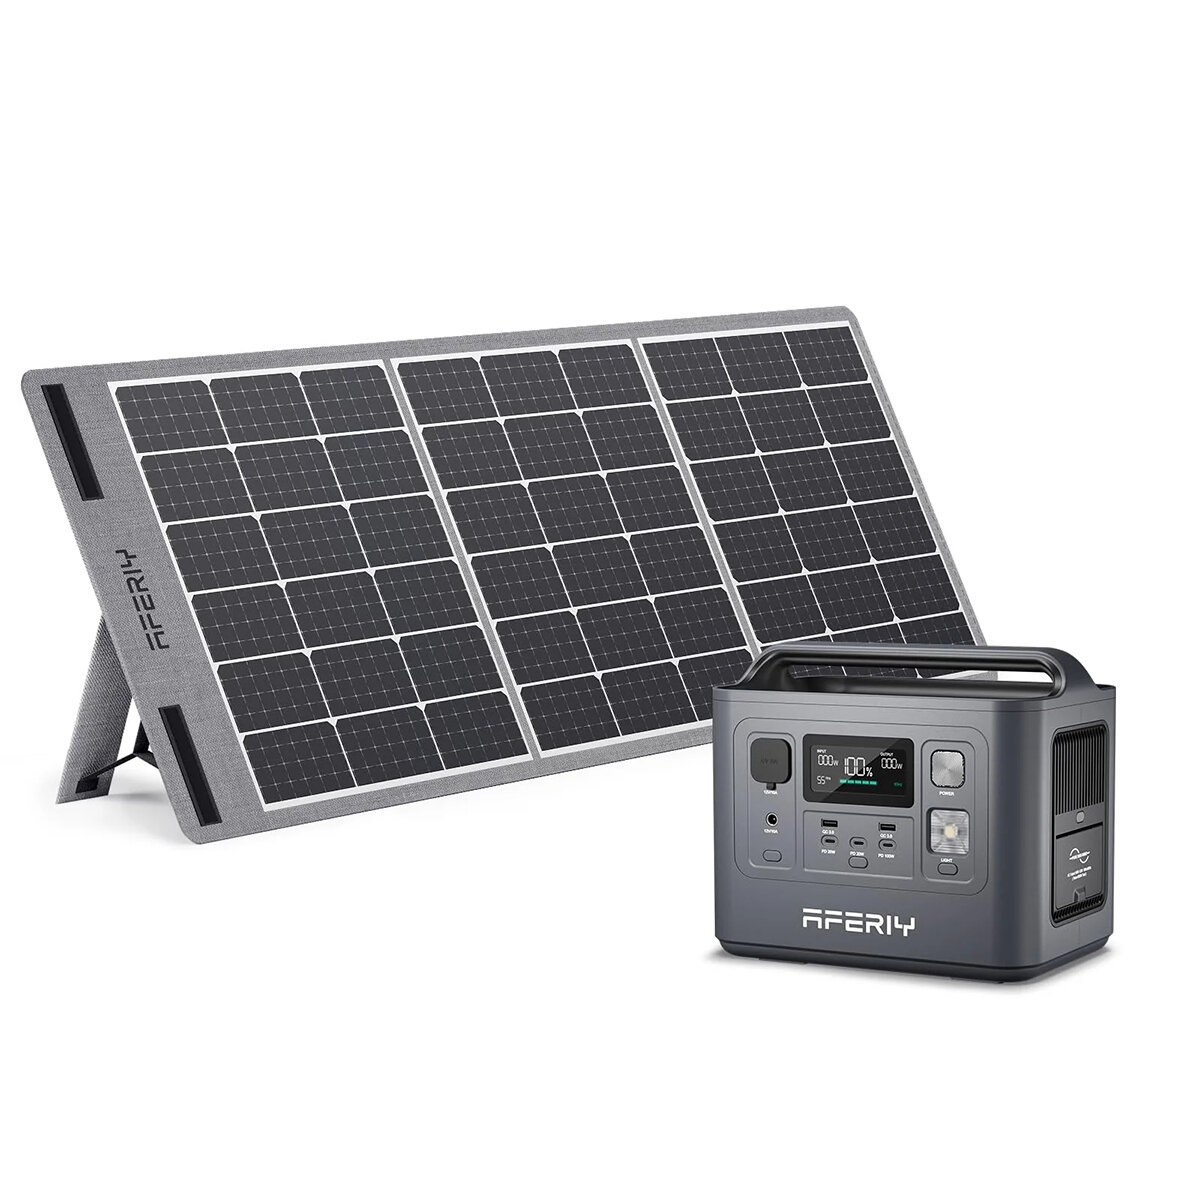 best price,aferiy,p010,800w,512wh,lifepo4,power,station,with,s100,100w,solar,panel,eu,coupon,price,discount